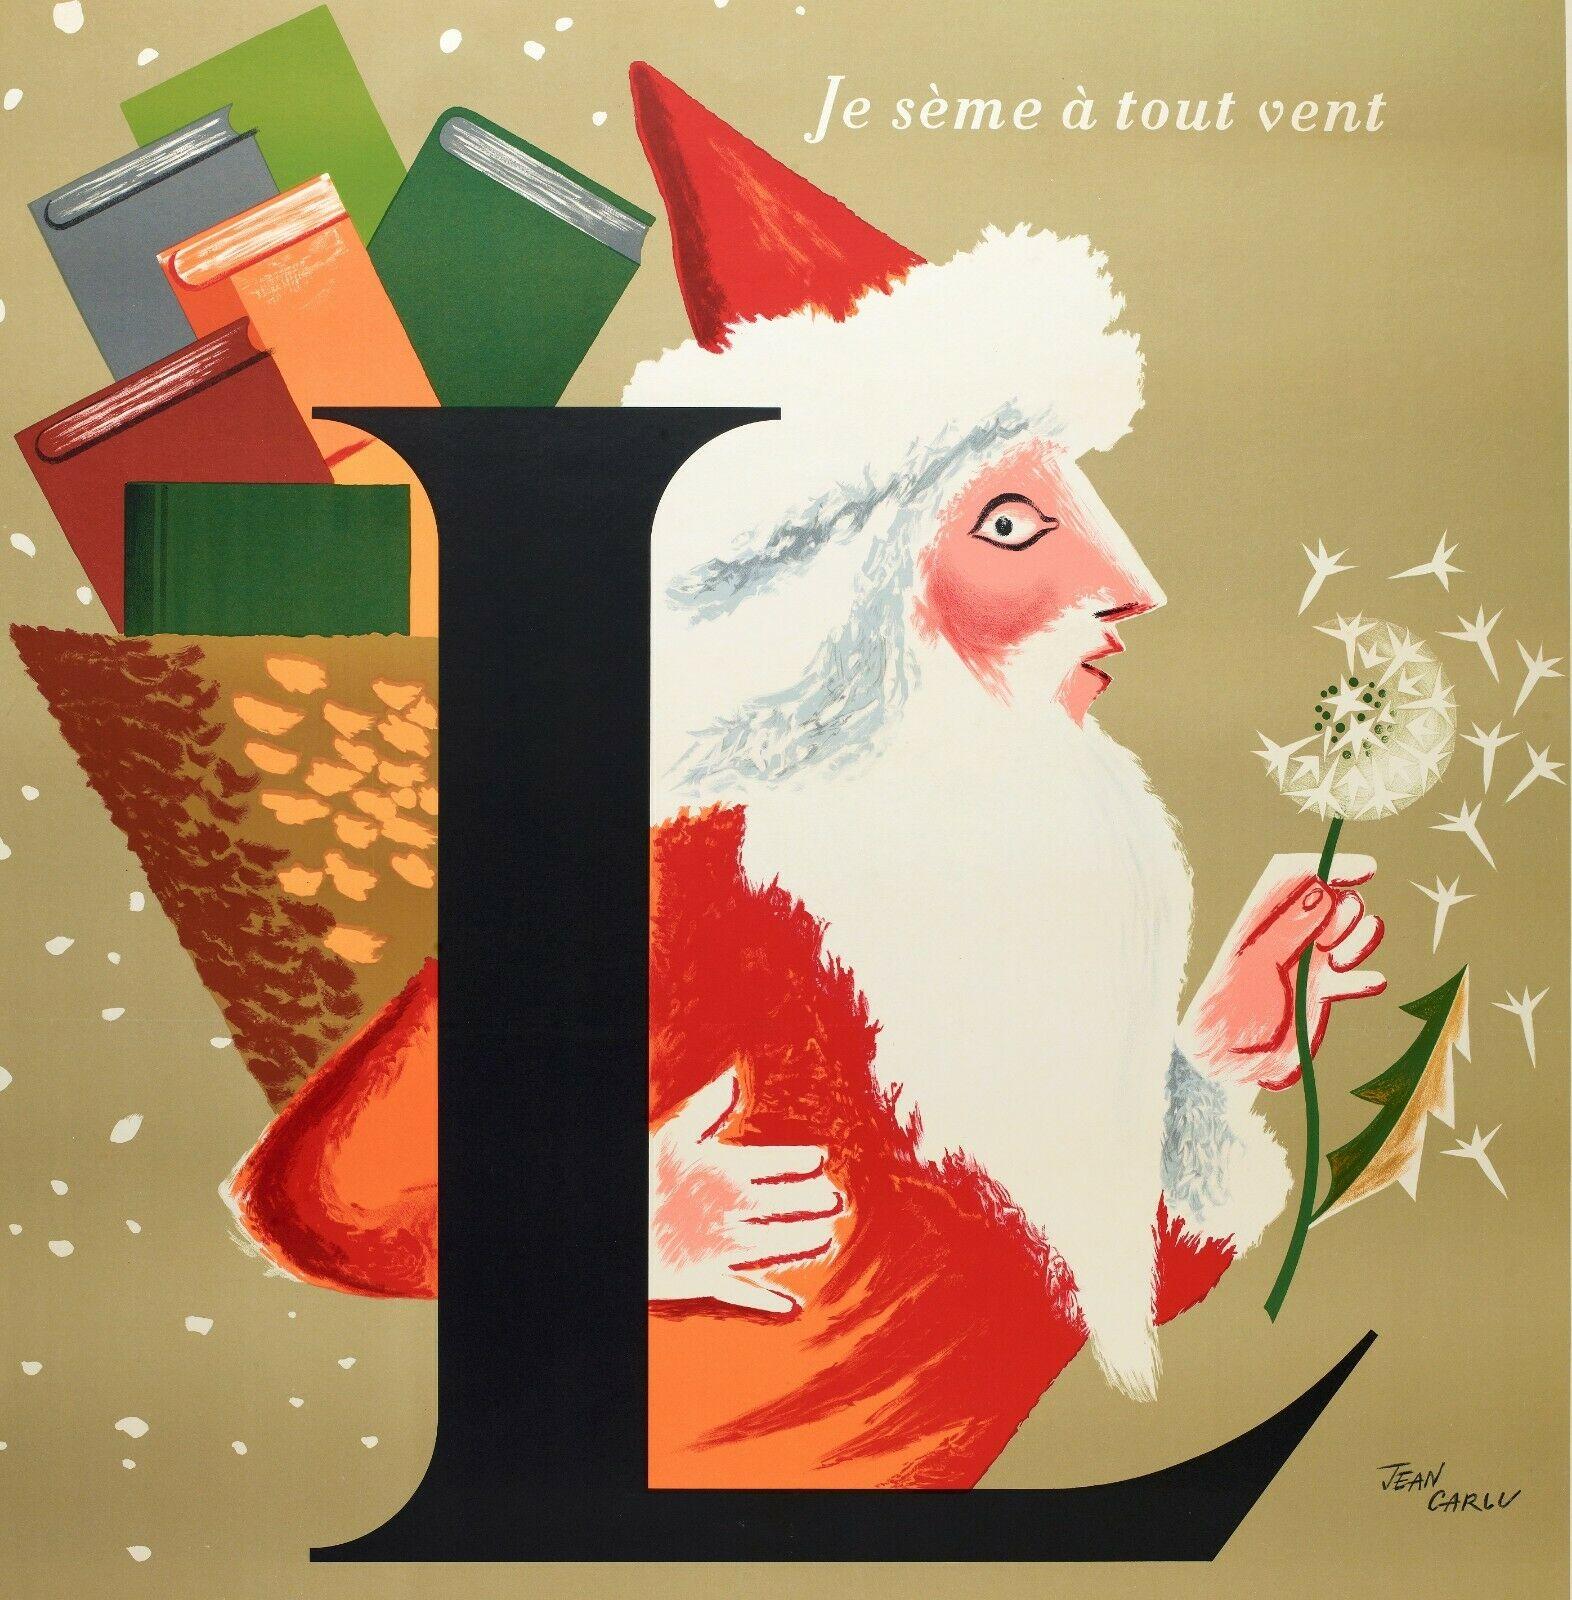 Original Vintage Poster-Jean Carlu-Larousse-Livre-Santa Claus, 1953

Promotional poster for the books of the Larousse Collection. Santa Claus has his hood filled with books.

Additional Details: 
Materials and Techniques: Colour lithograph on